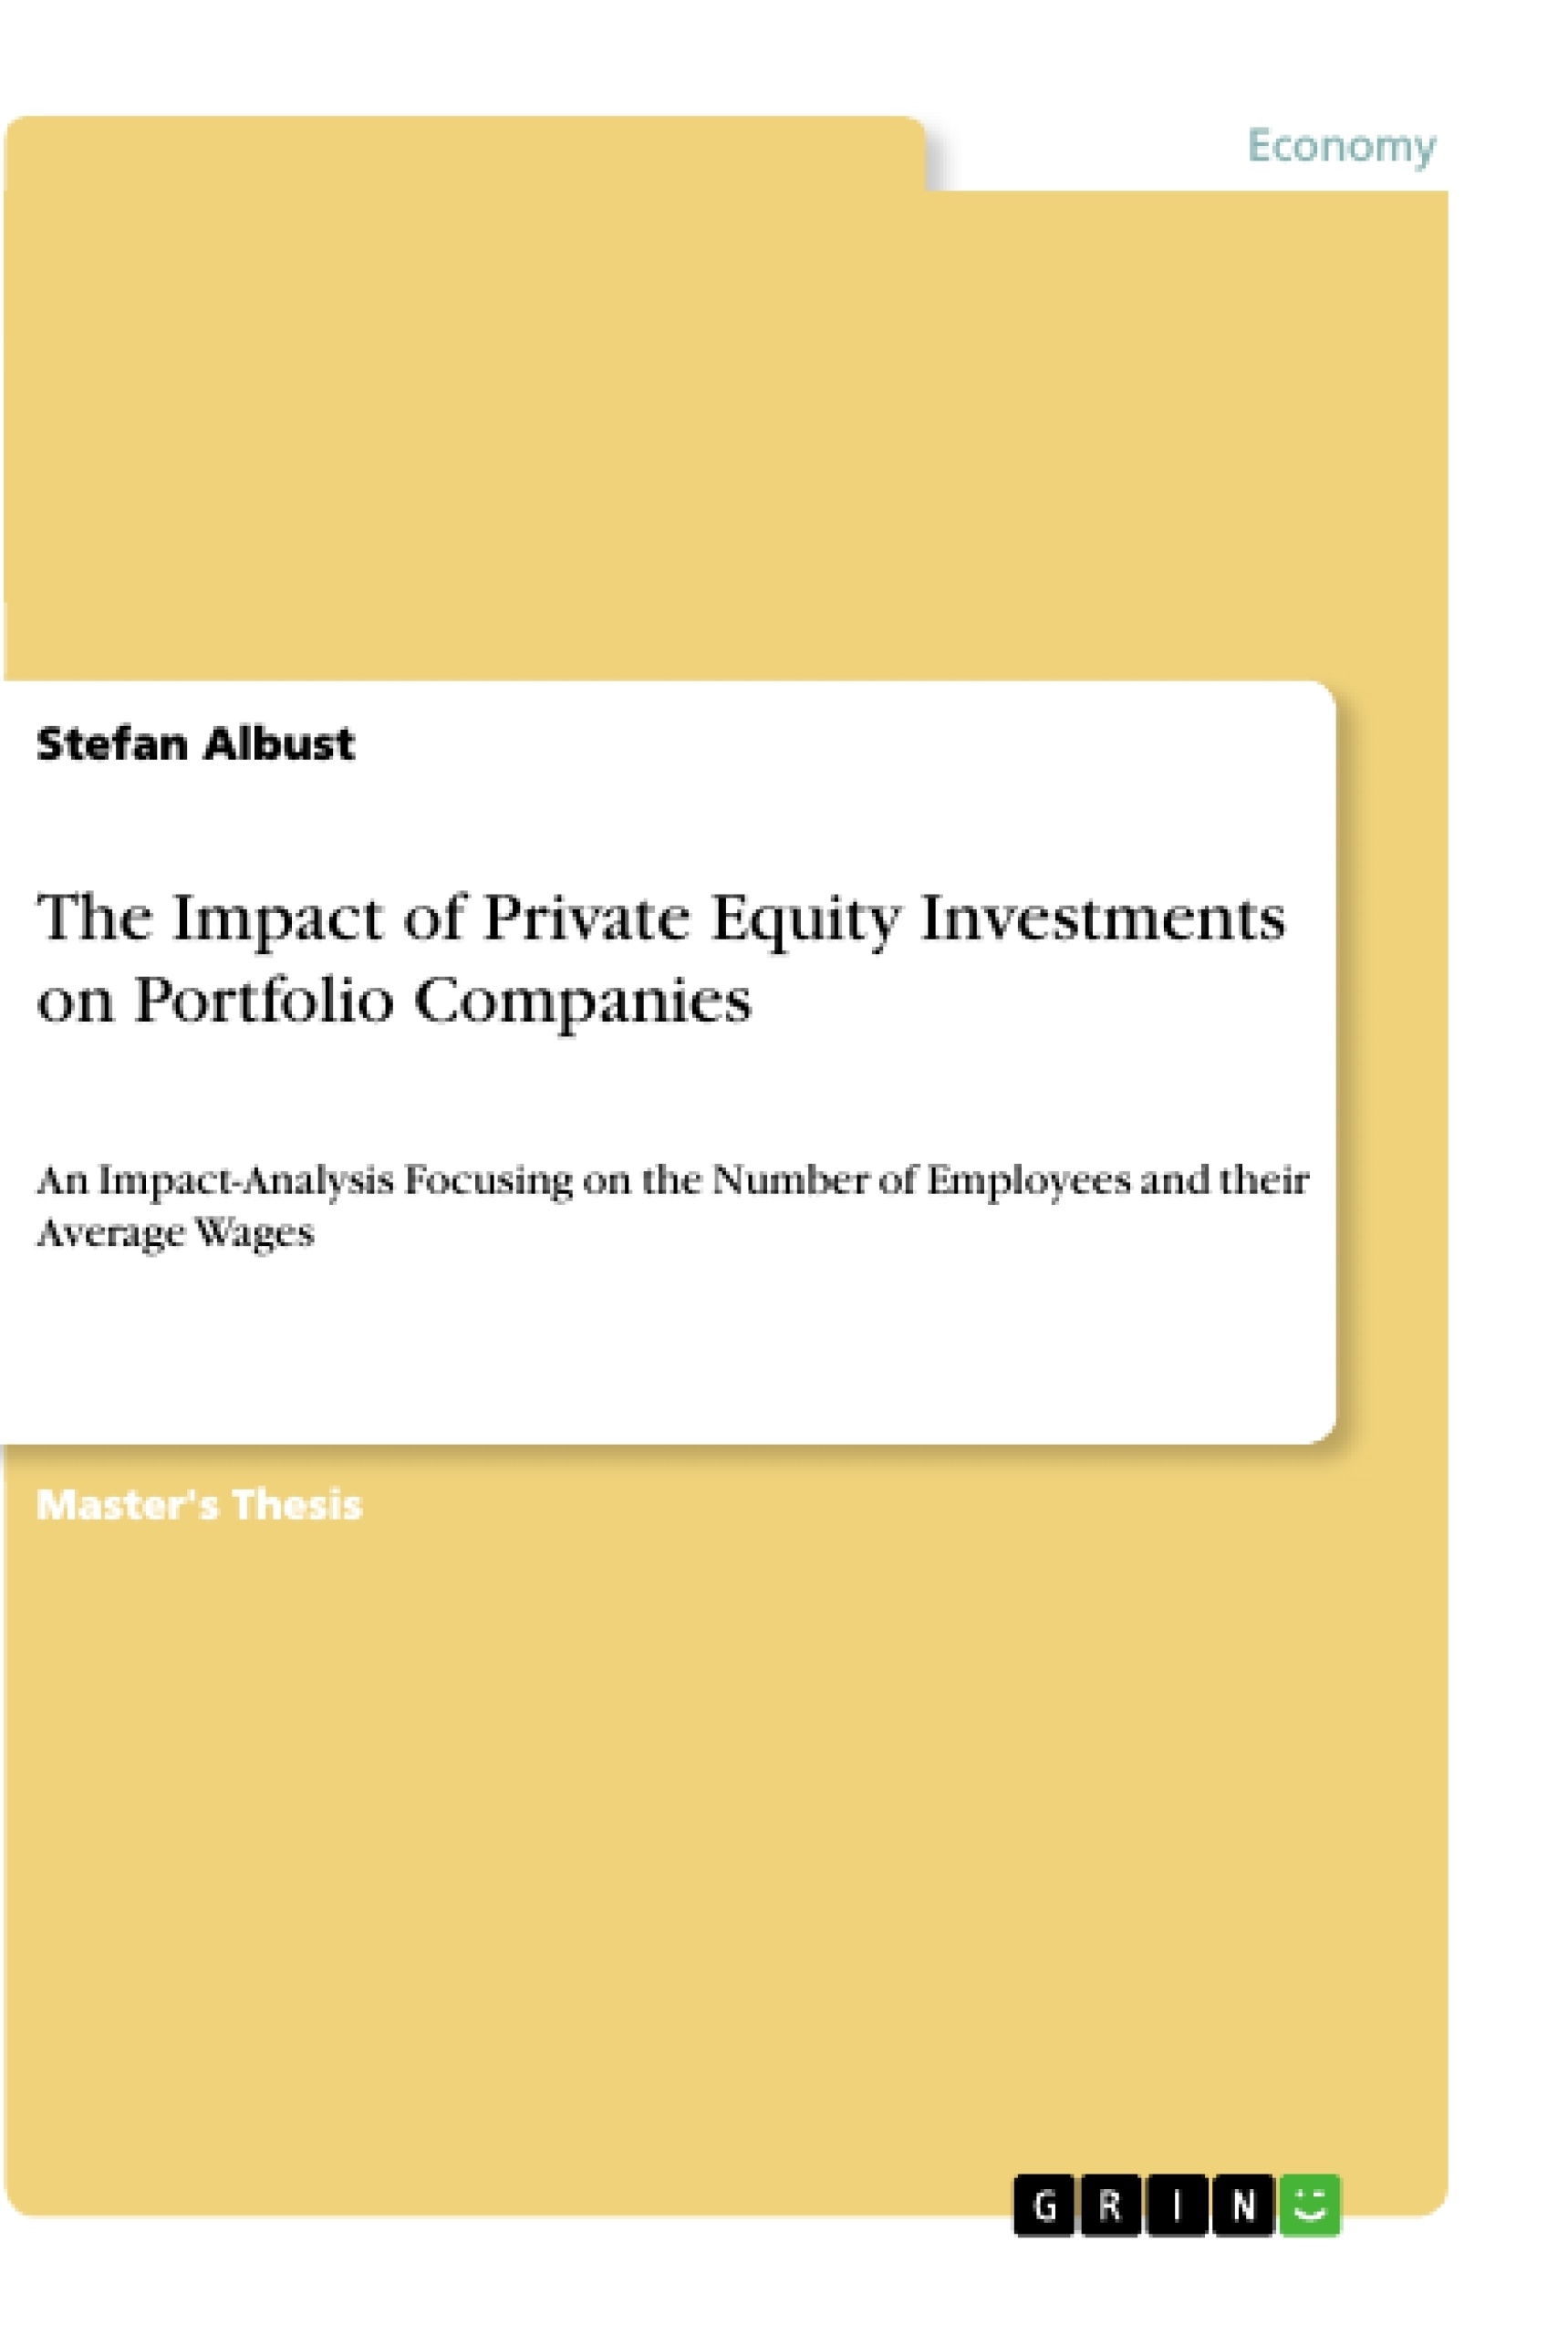 Title: The Impact of Private Equity Investments on Portfolio Companies